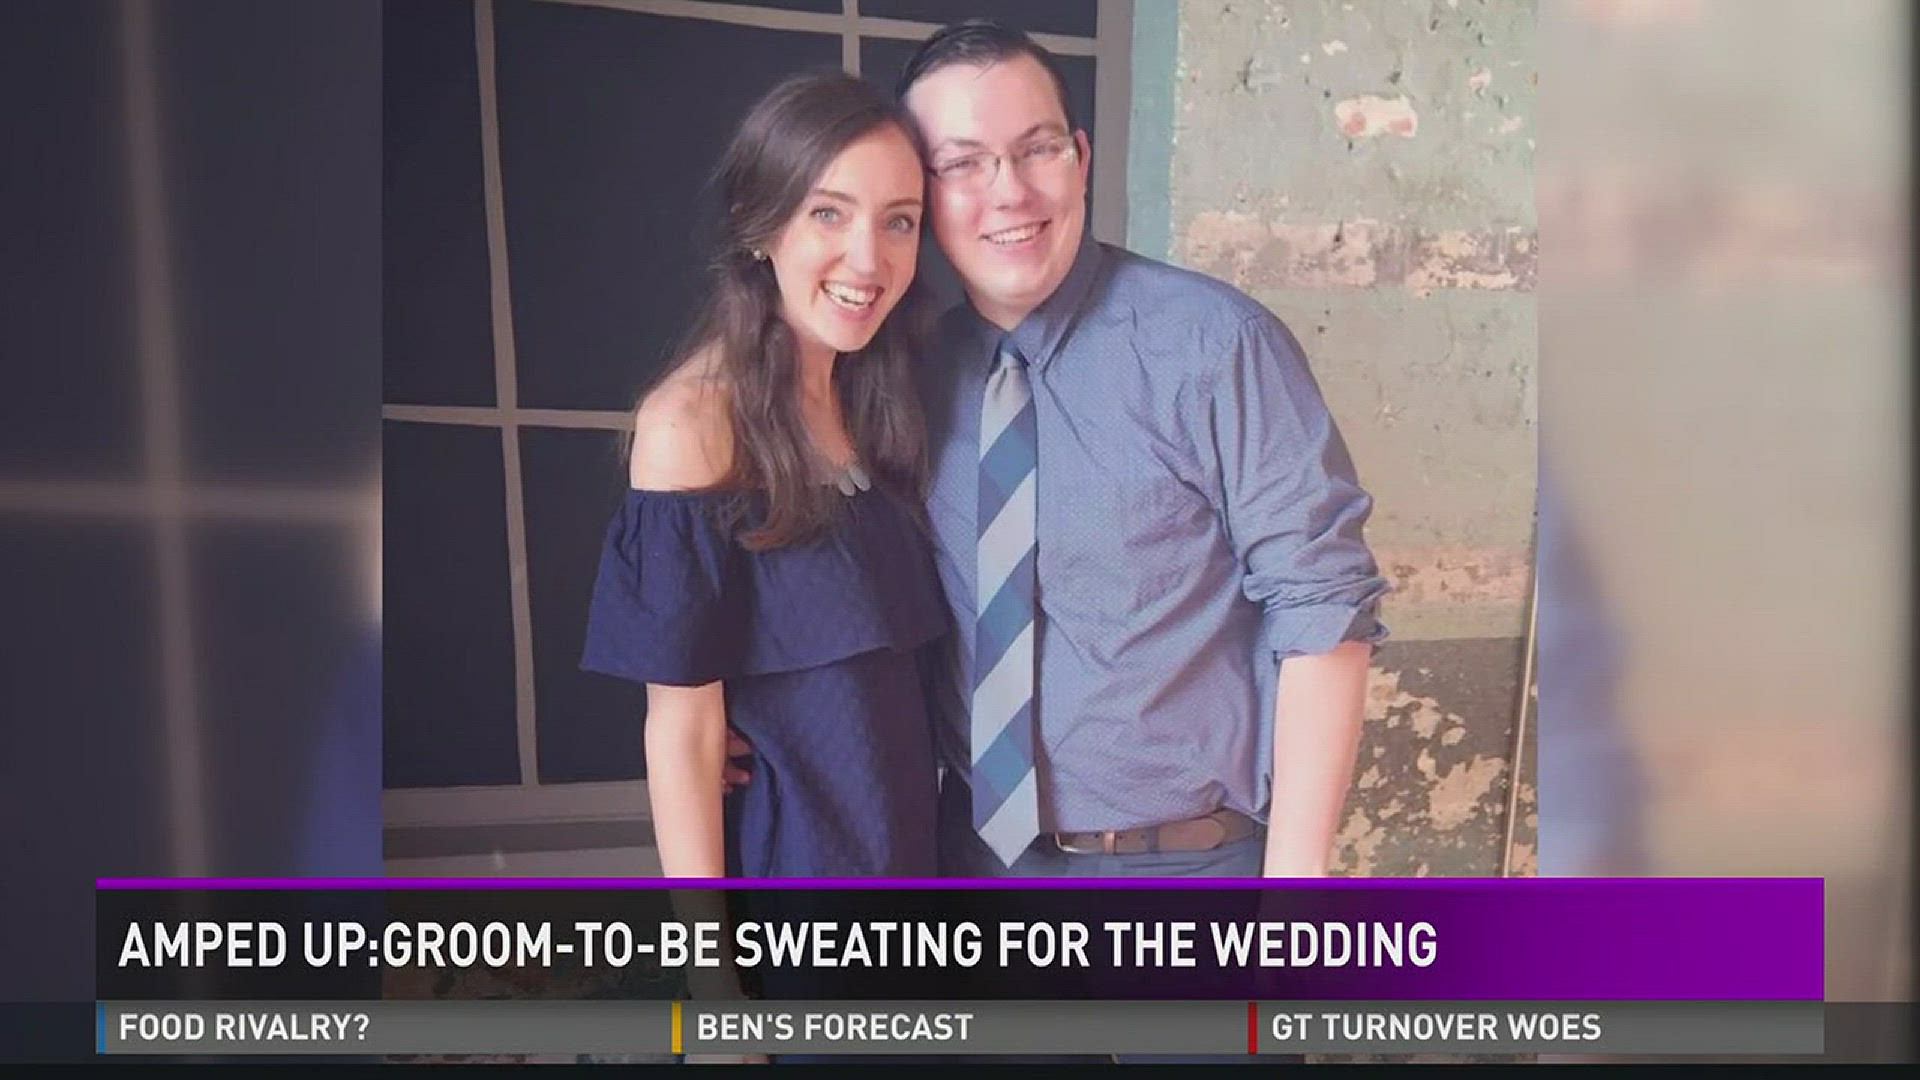 AMPED UP: Groom-to-be sweating for the wedding